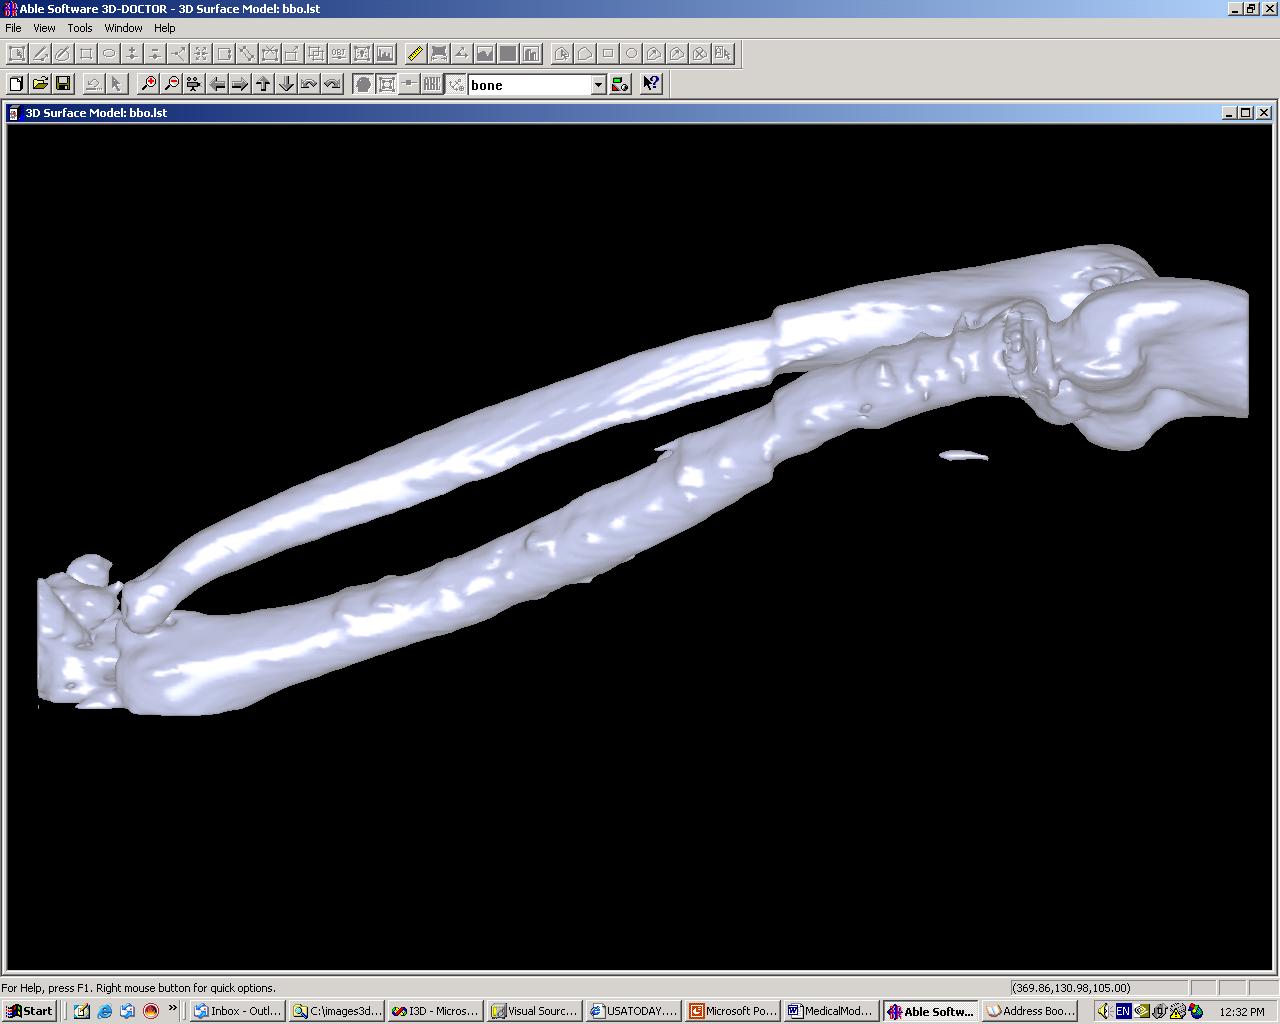 3D Model created from CT Image